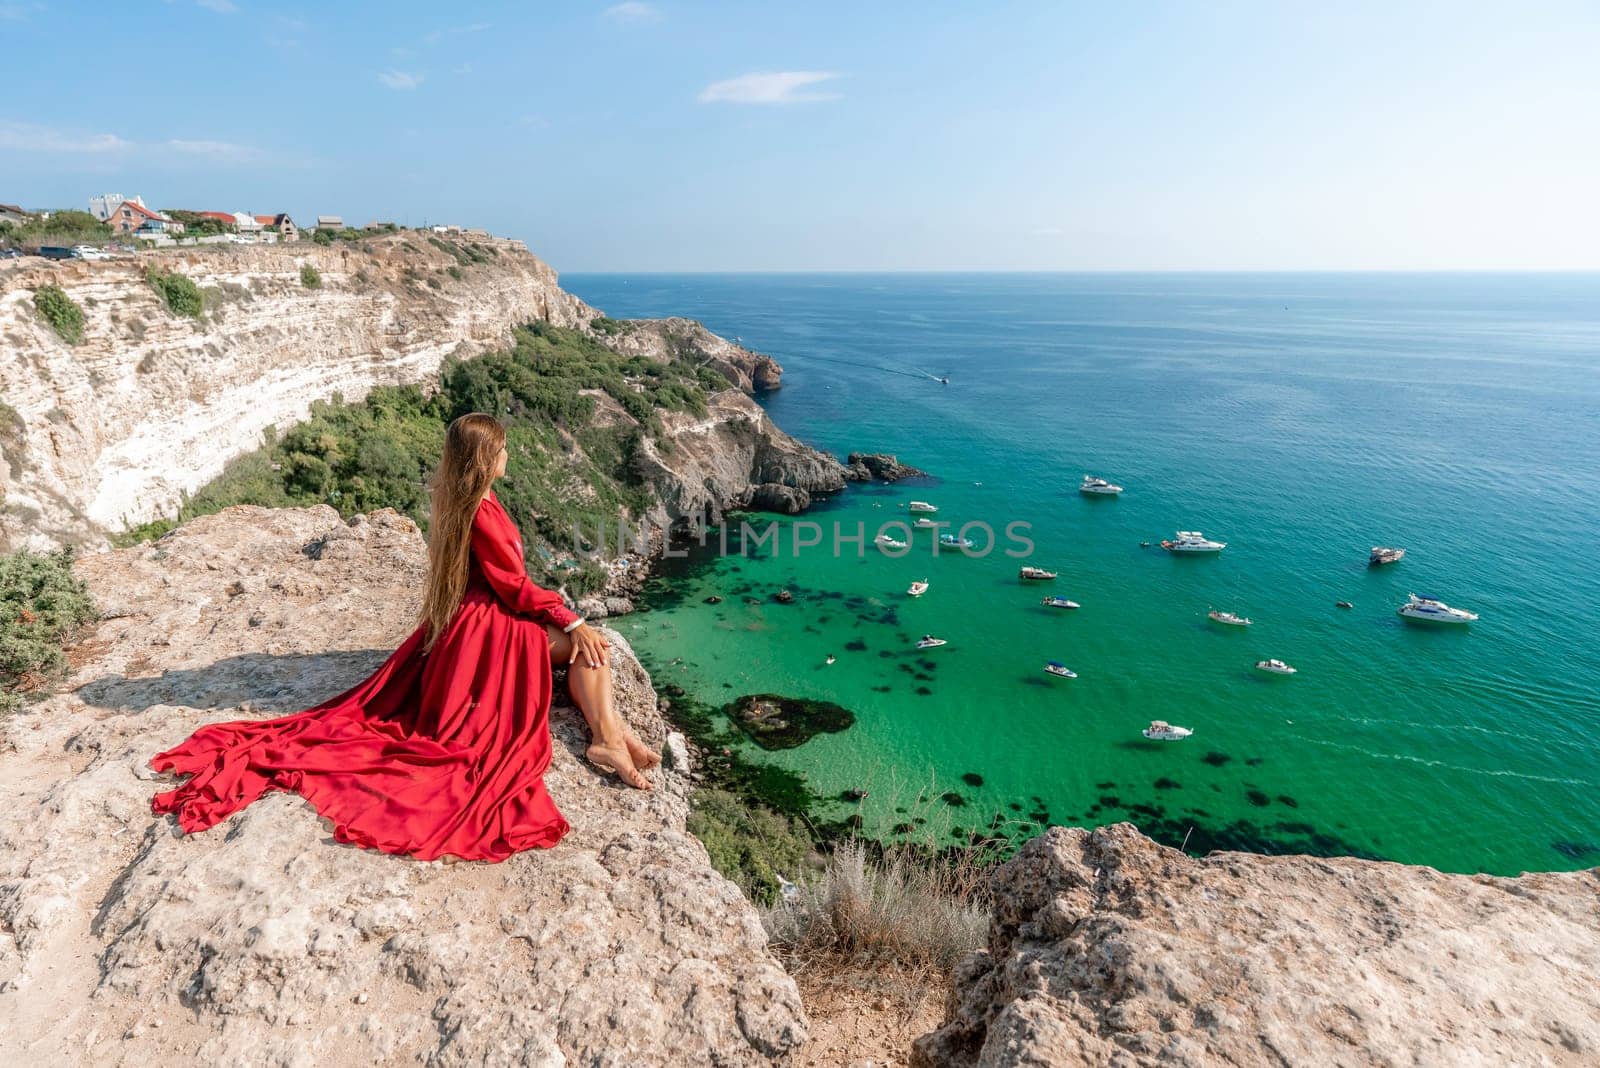 Woman red dress sea. Happy woman in a red dress and white bikini sitting on a rocky outcrop, gazing out at the sea with boats and yachts in the background. by Matiunina